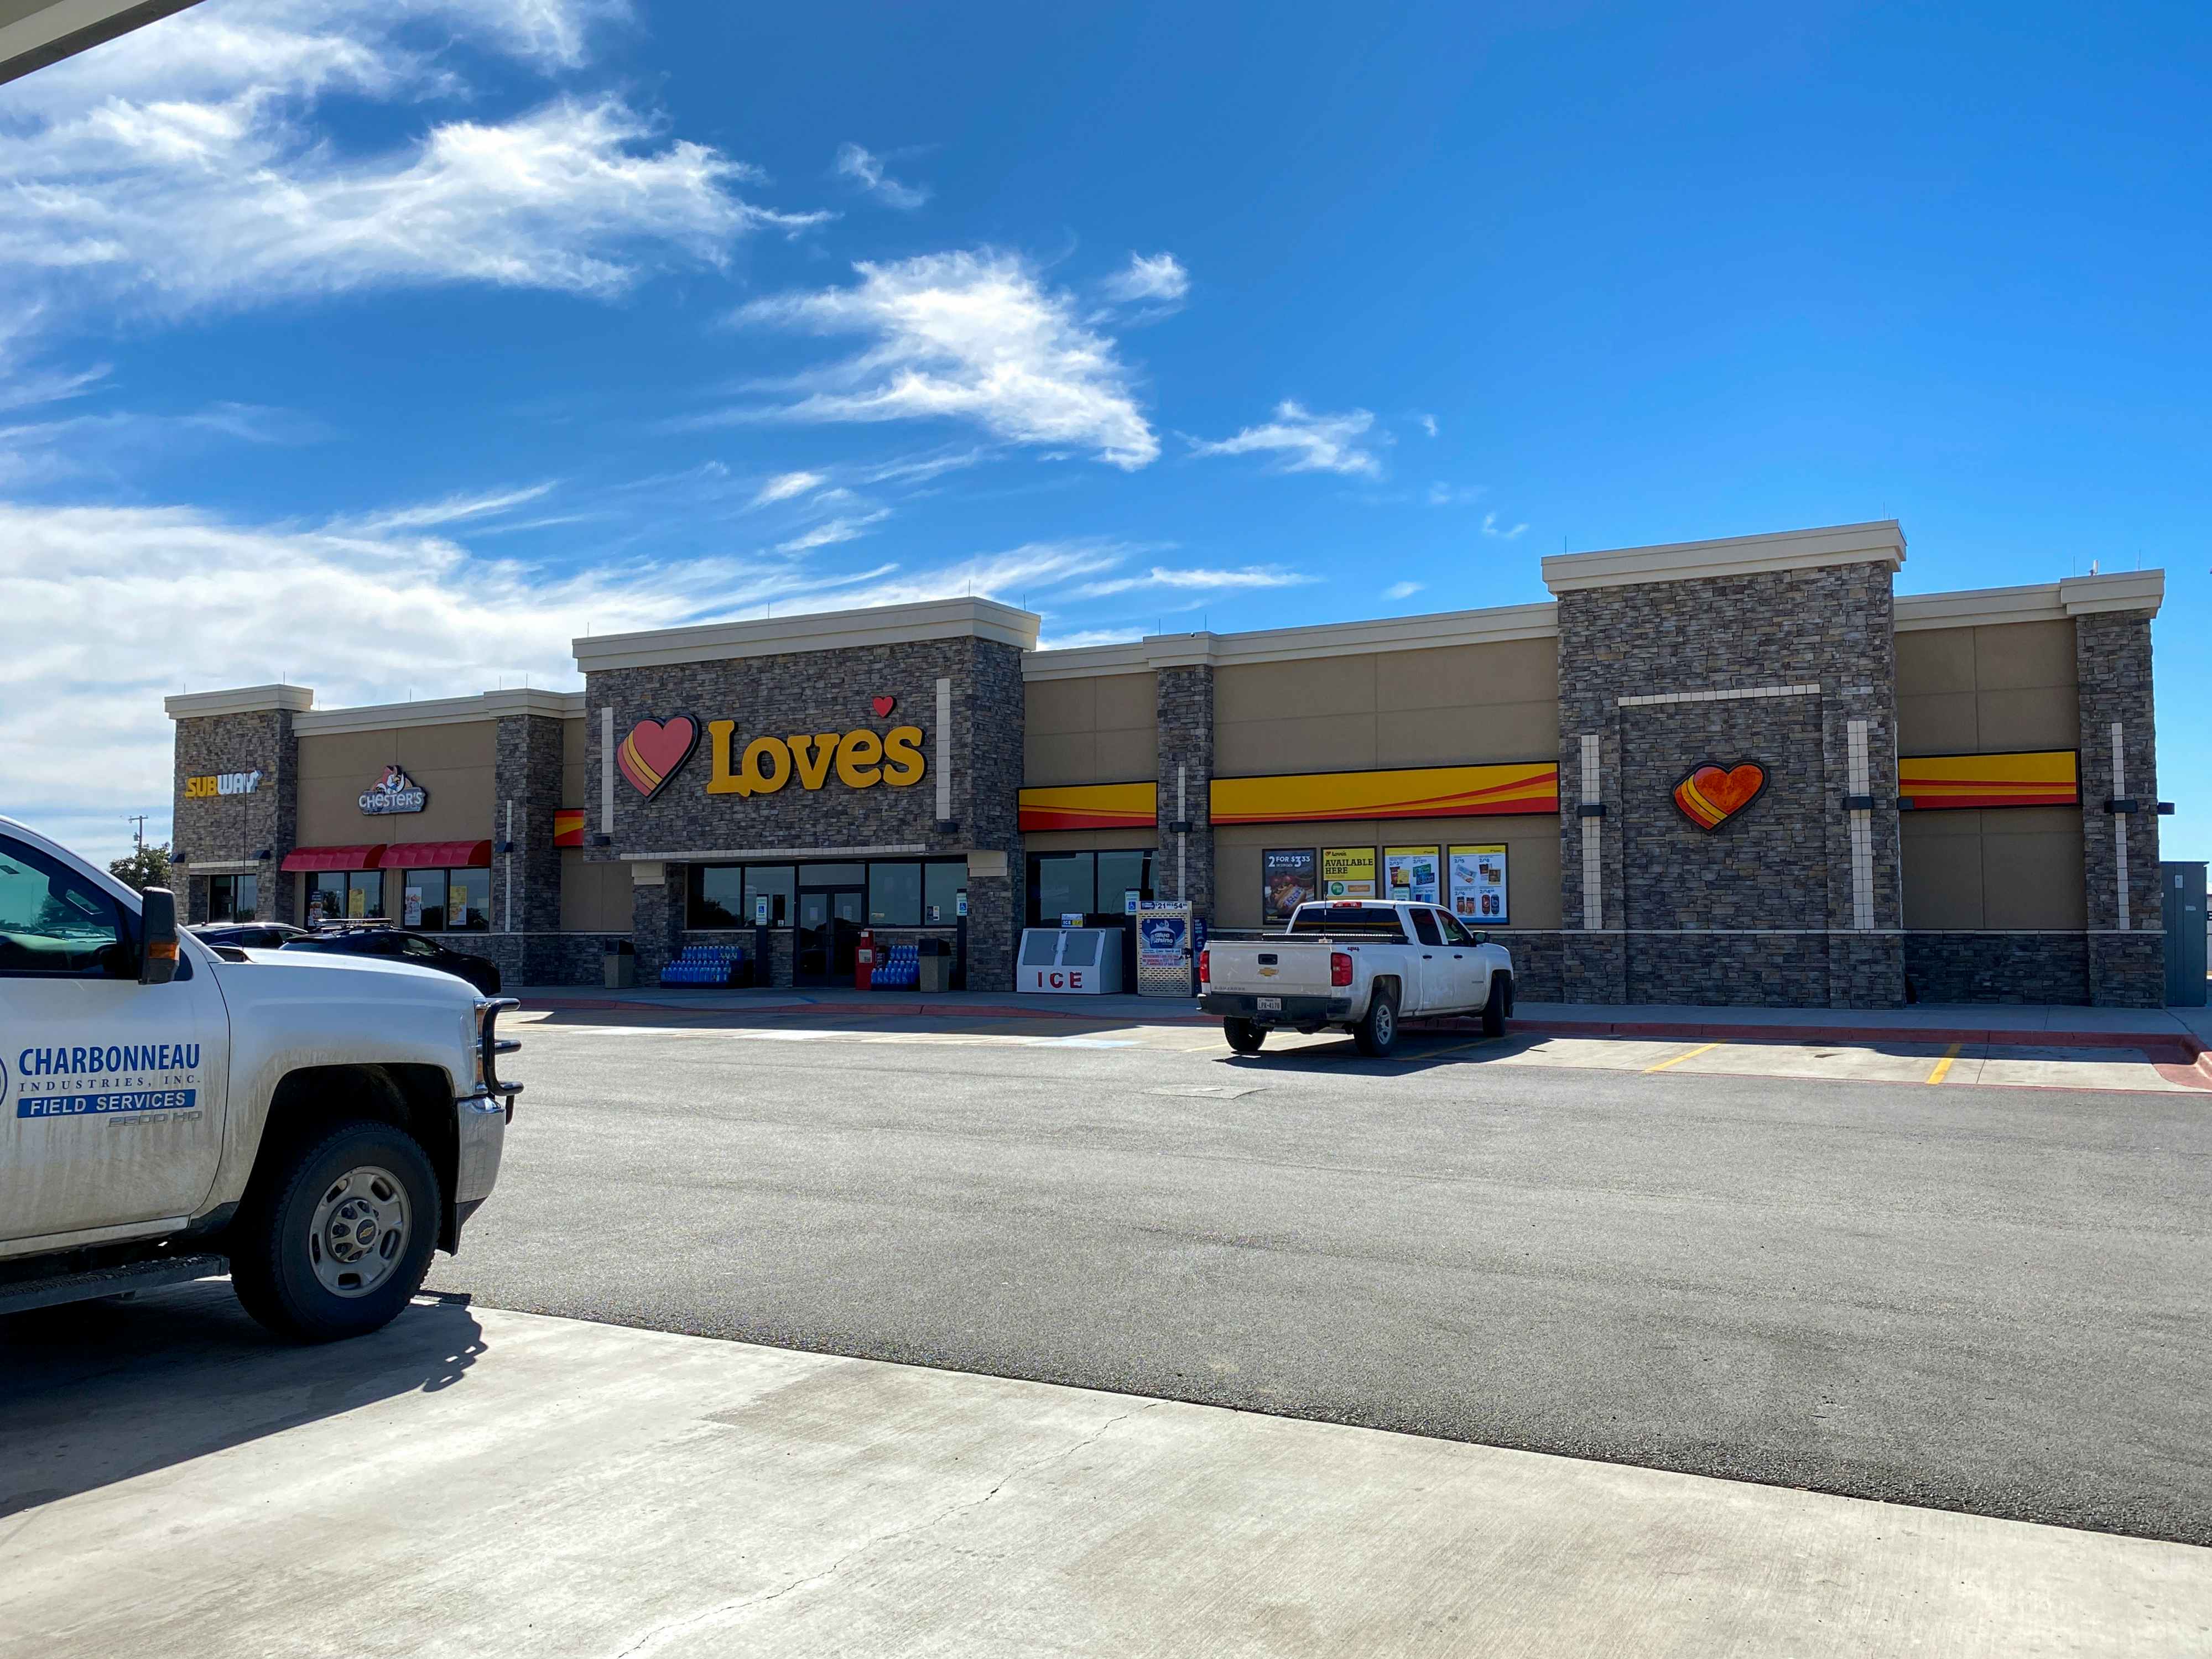 The front of a Love's travel center with a truck parked in front.